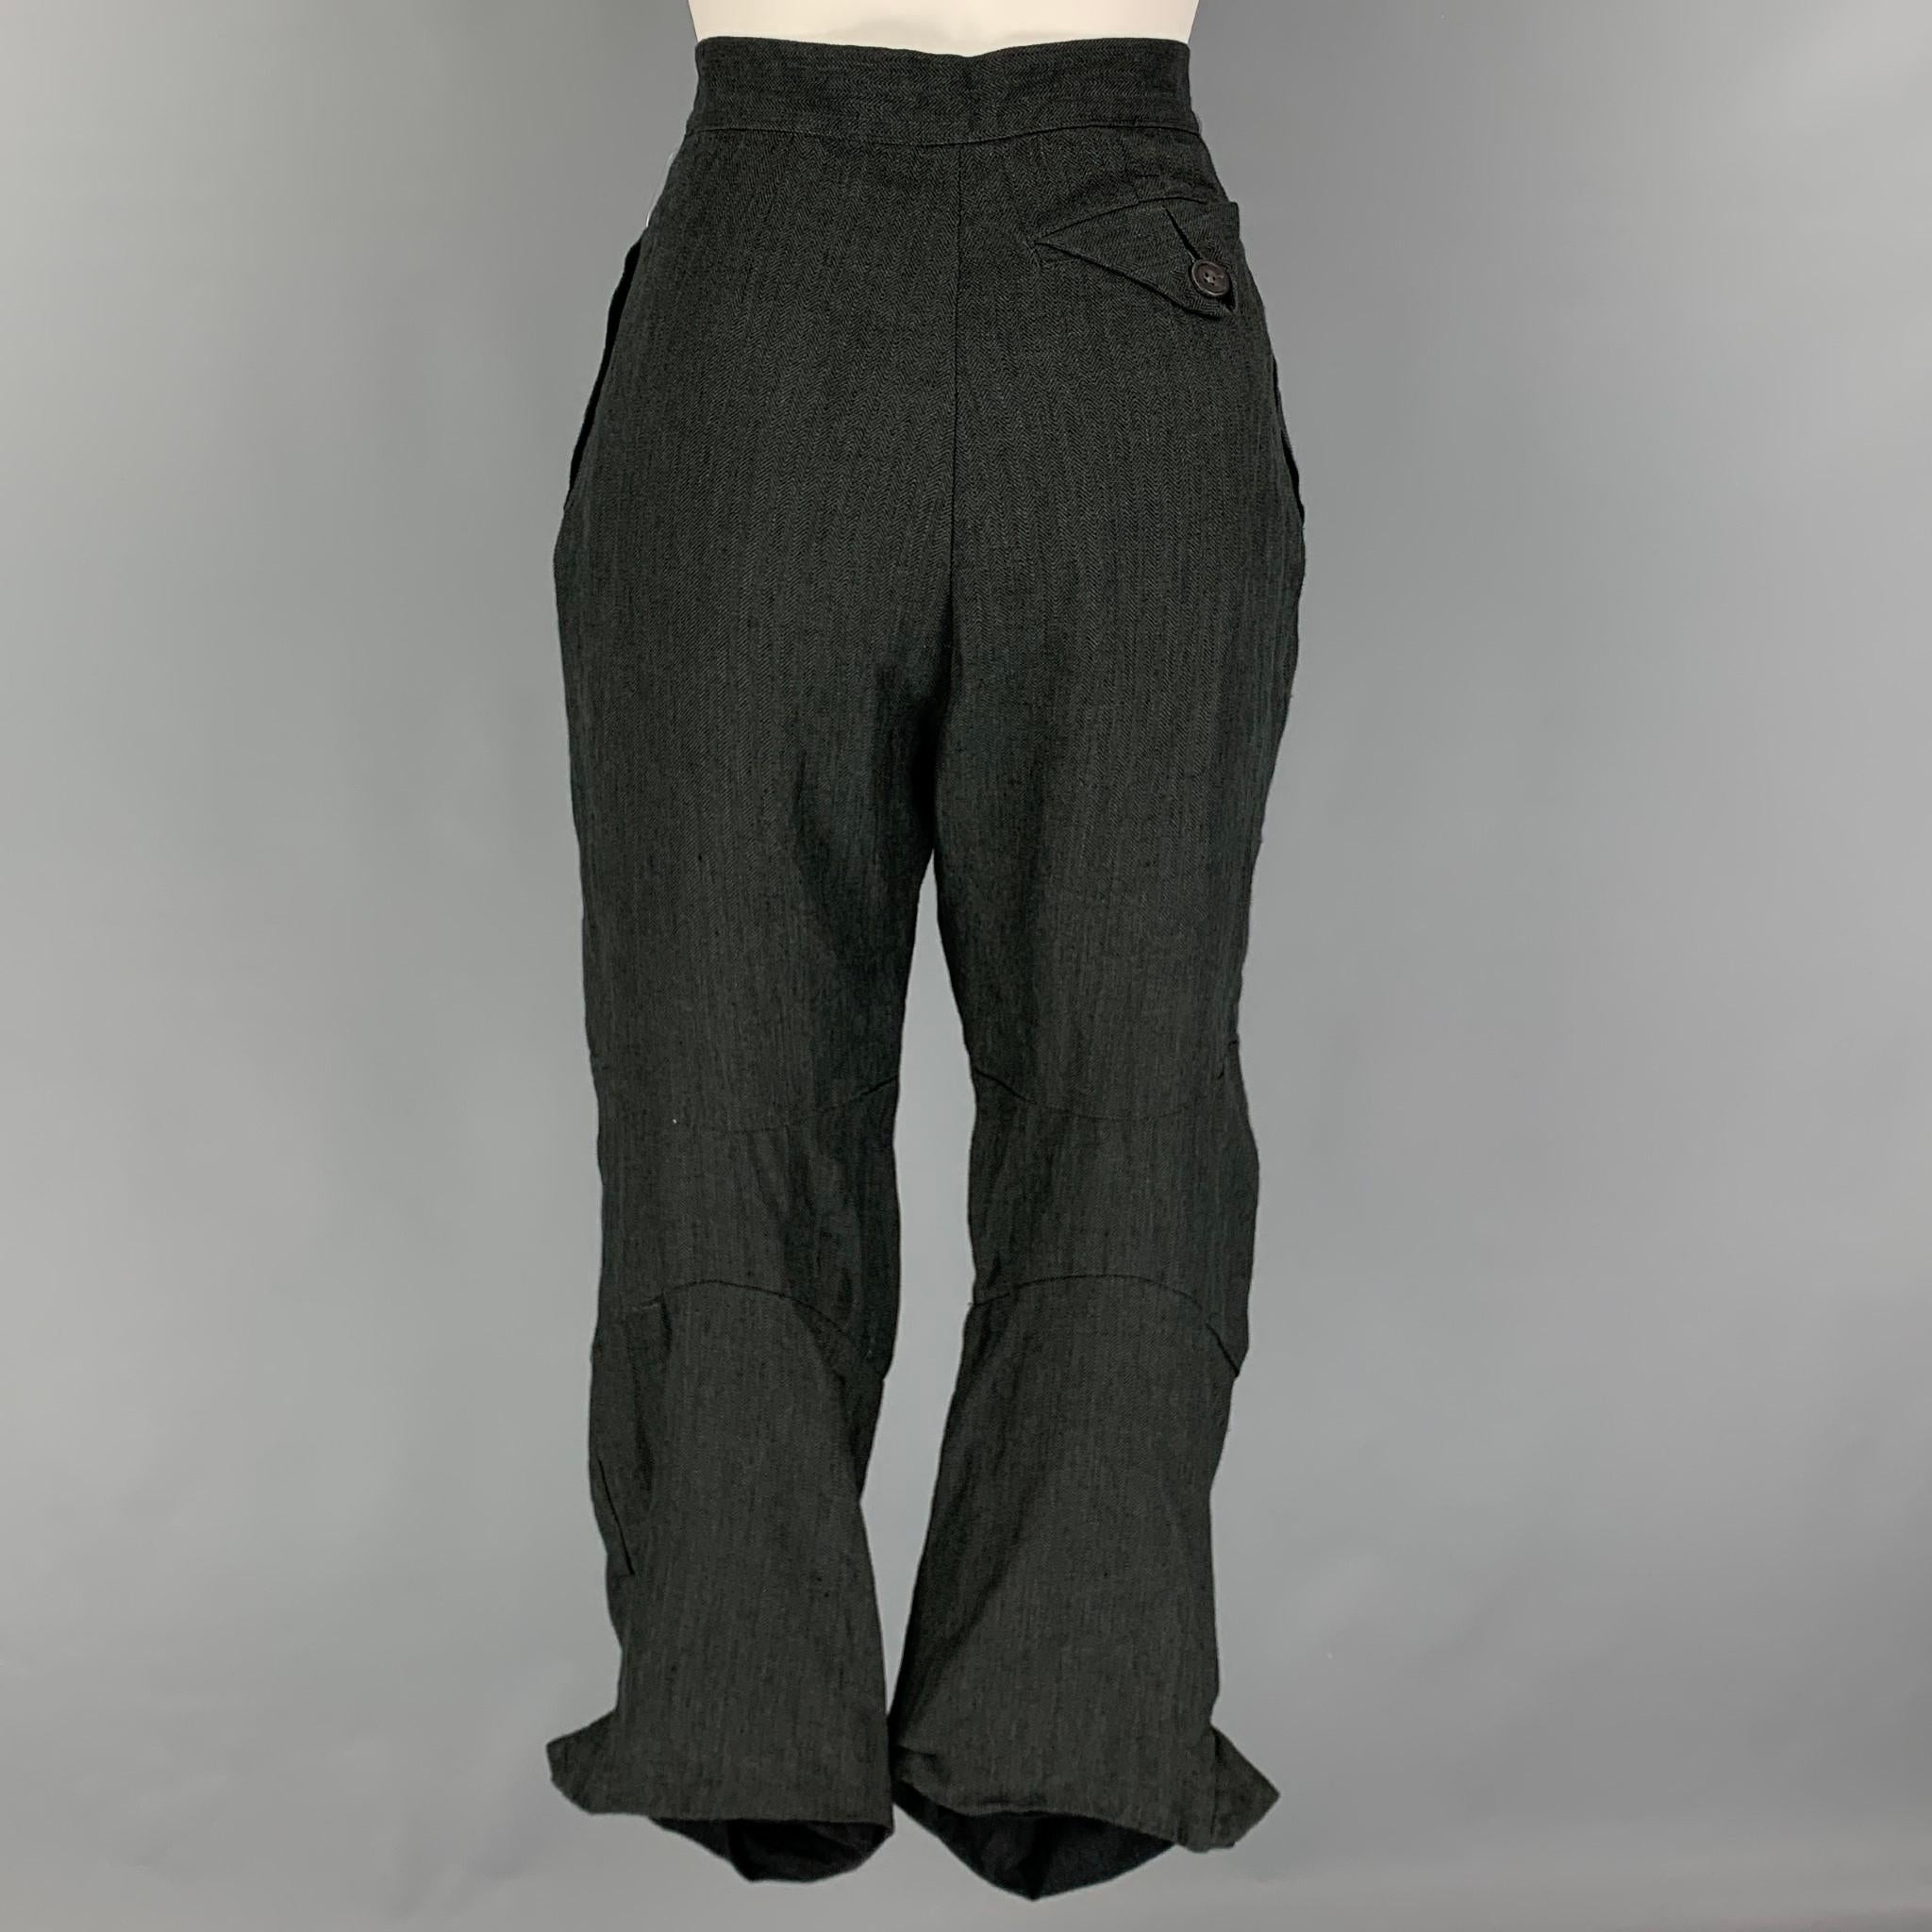 PAUL HARDEN dress pants comes in a gray linen featuring a high waisted style, cropped, and a button fly closure. 

Very Good Pre-Owned Condition.
Marked: S

Measurements:

Waist: 28 in.
Rise: 14 in.
Inseam: 23 in.
Leg Opening: 18 in.